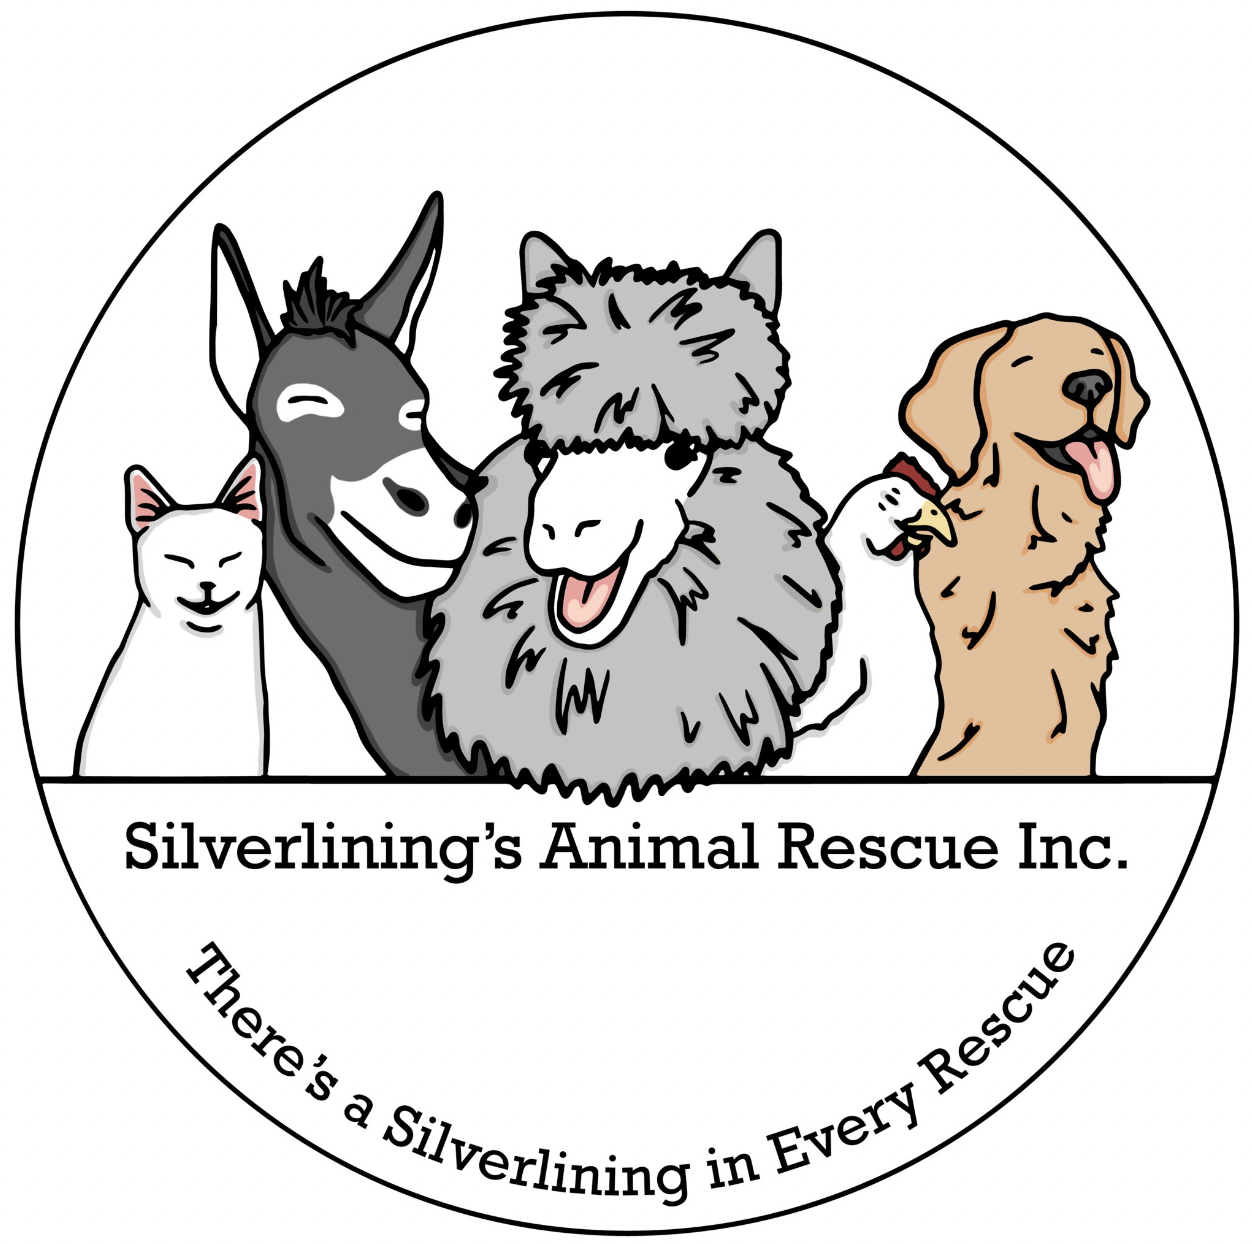 Silverlining's Animal Rescue Inc